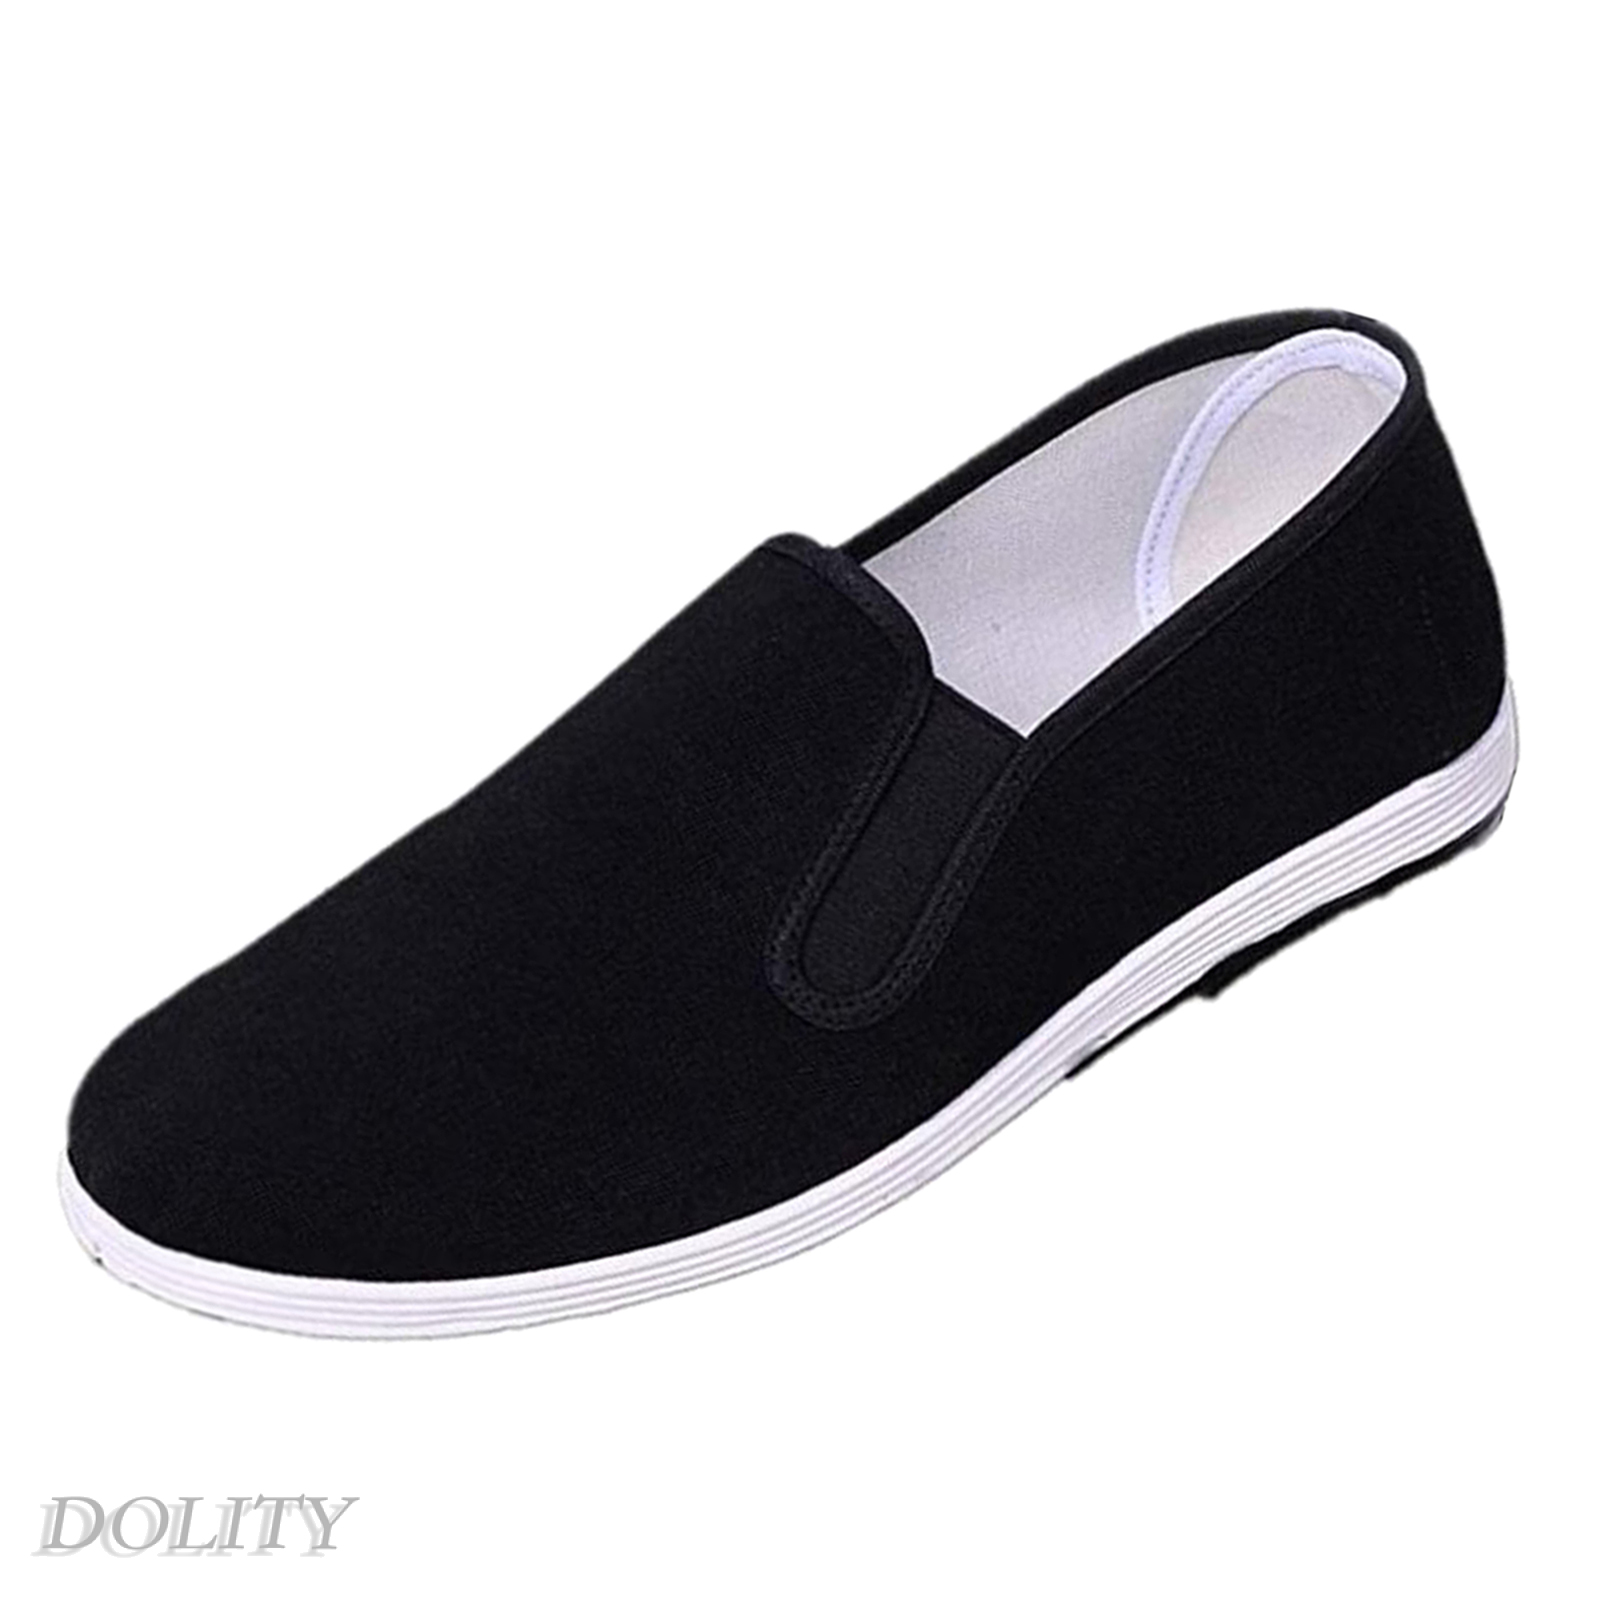 [DOLITY]Chinese Traditional Cotton Cloth Shoes Kung Fu Tai Chi Shoes Oxford Sole Unisex Black Size 39-44 for Men Outdoor Sports